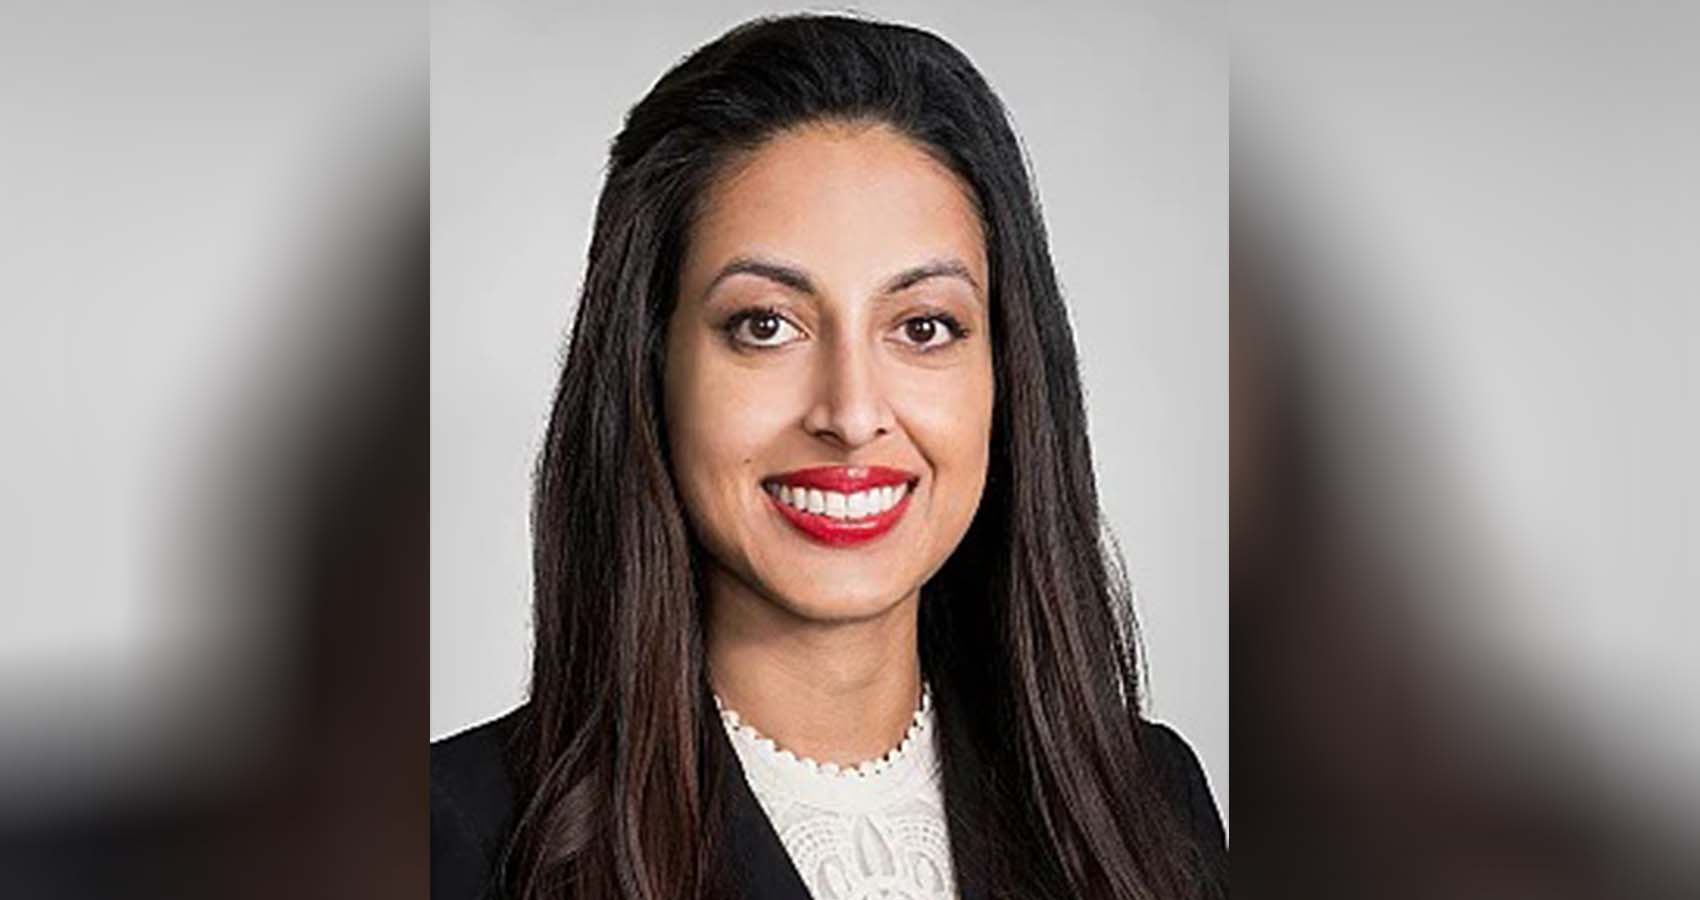 Sopen Shah Nominated By President Biden As U.S. Attorney For Wisconsin